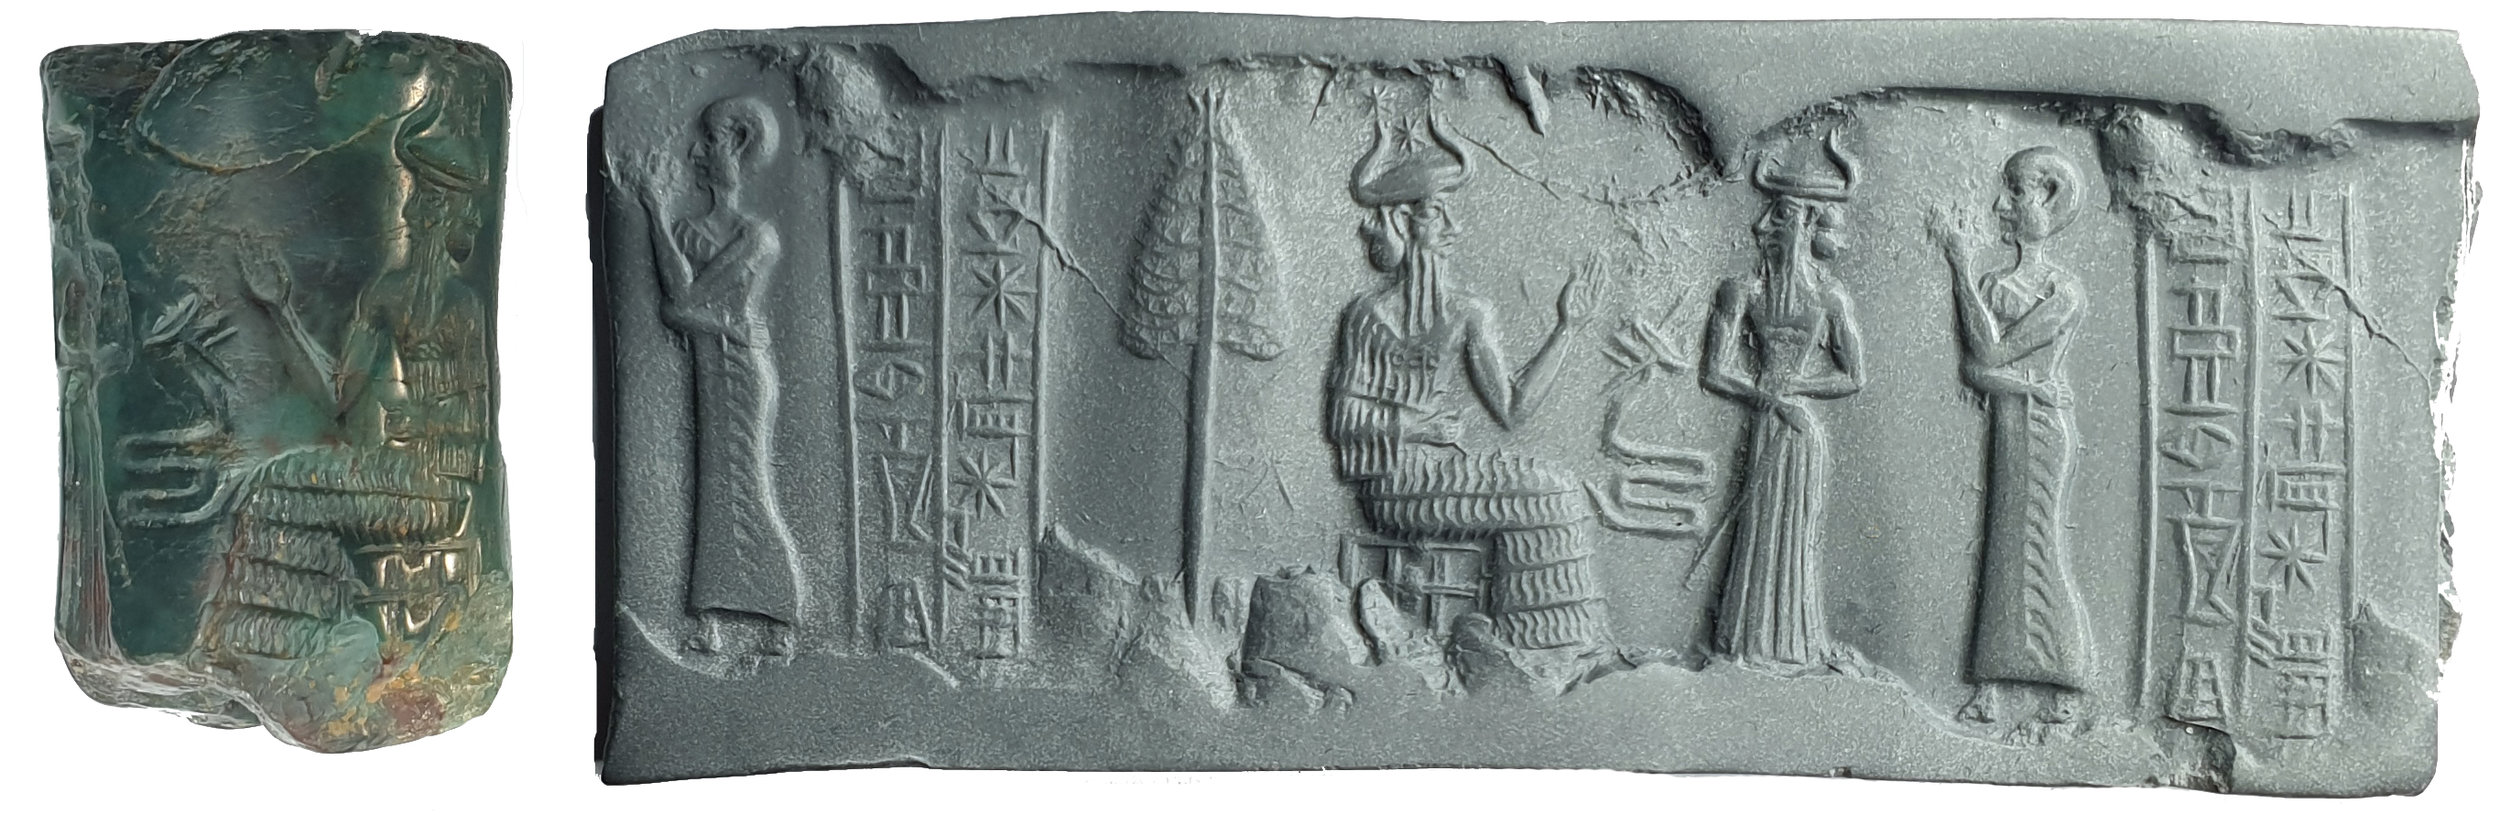  Western Asiatic Neo-Sumerian Cylinder Seal for Temple Priest of King Shu-sin of Der Ur III, King Shu-sin, 1972-1964 BC 